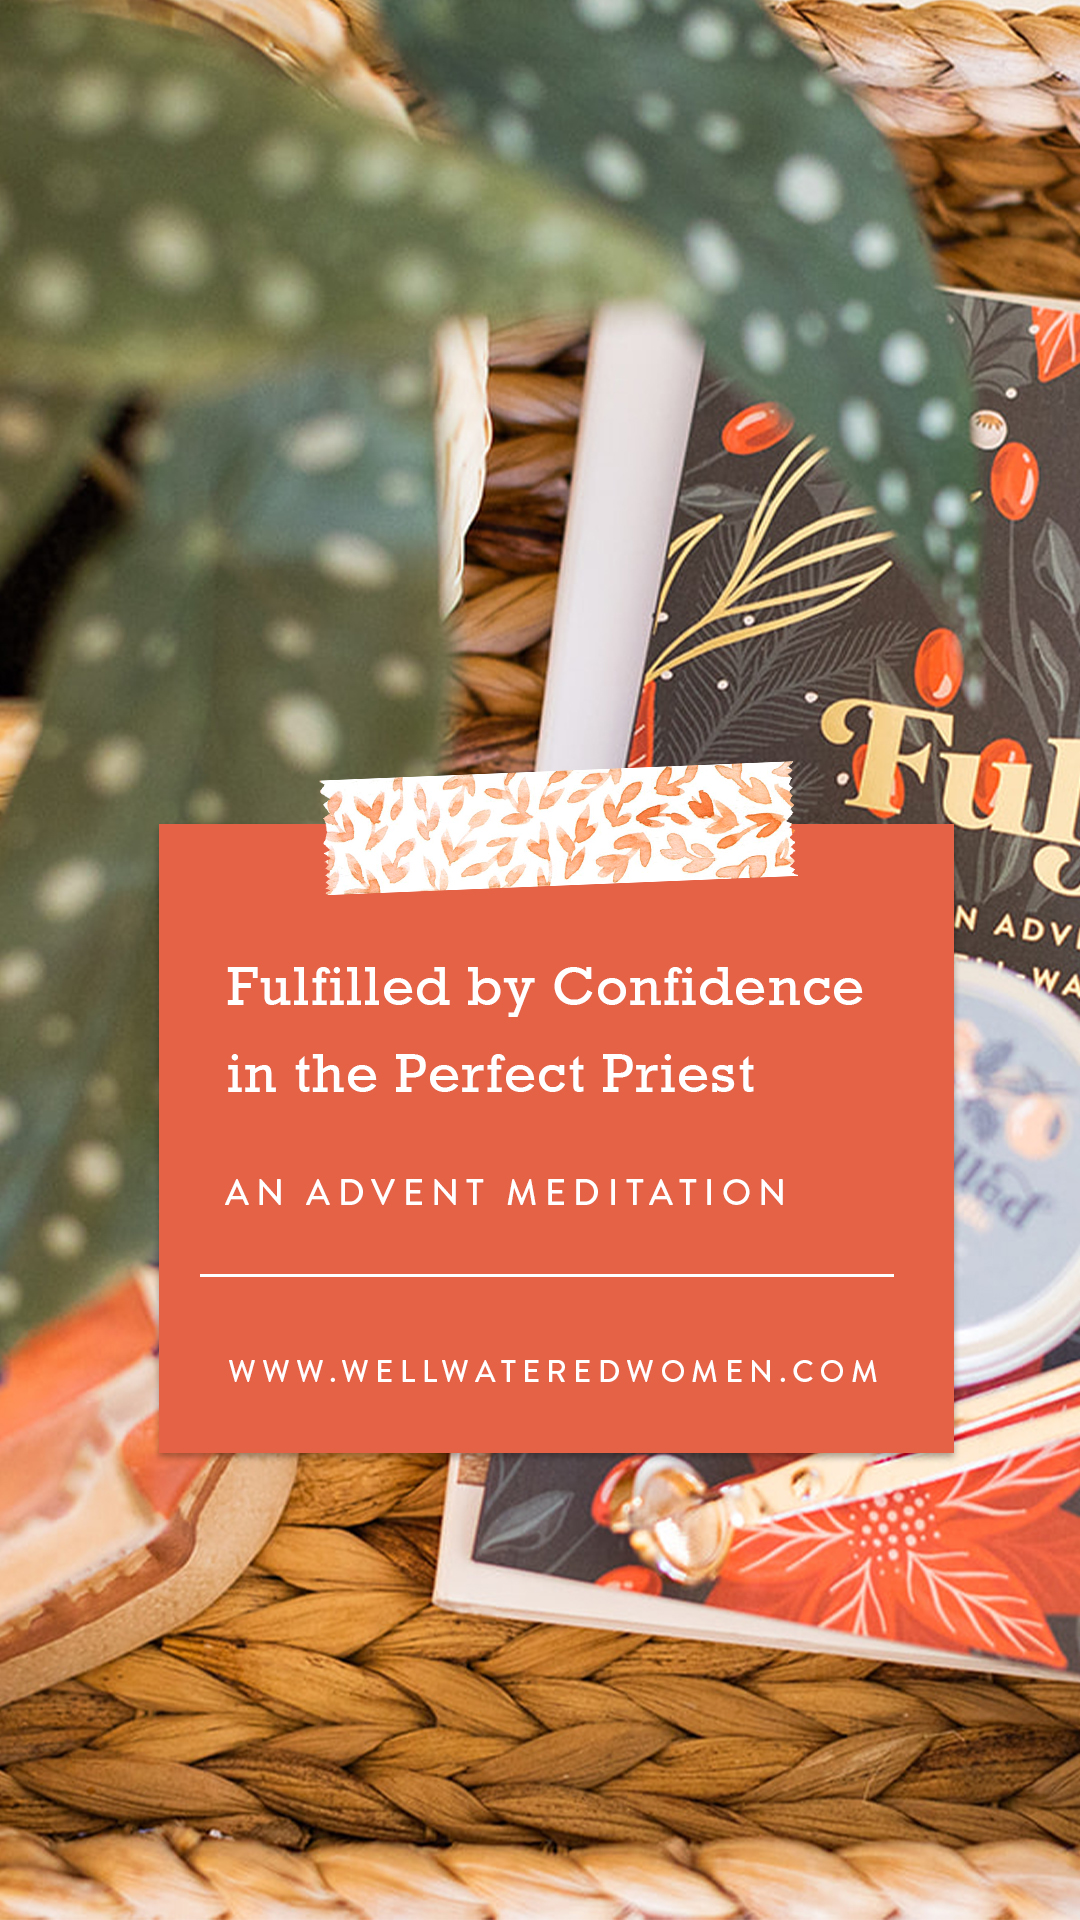 Fulfilled by Confidence in the Perfect Priest - an Advent Meditation from Well-Watered Women